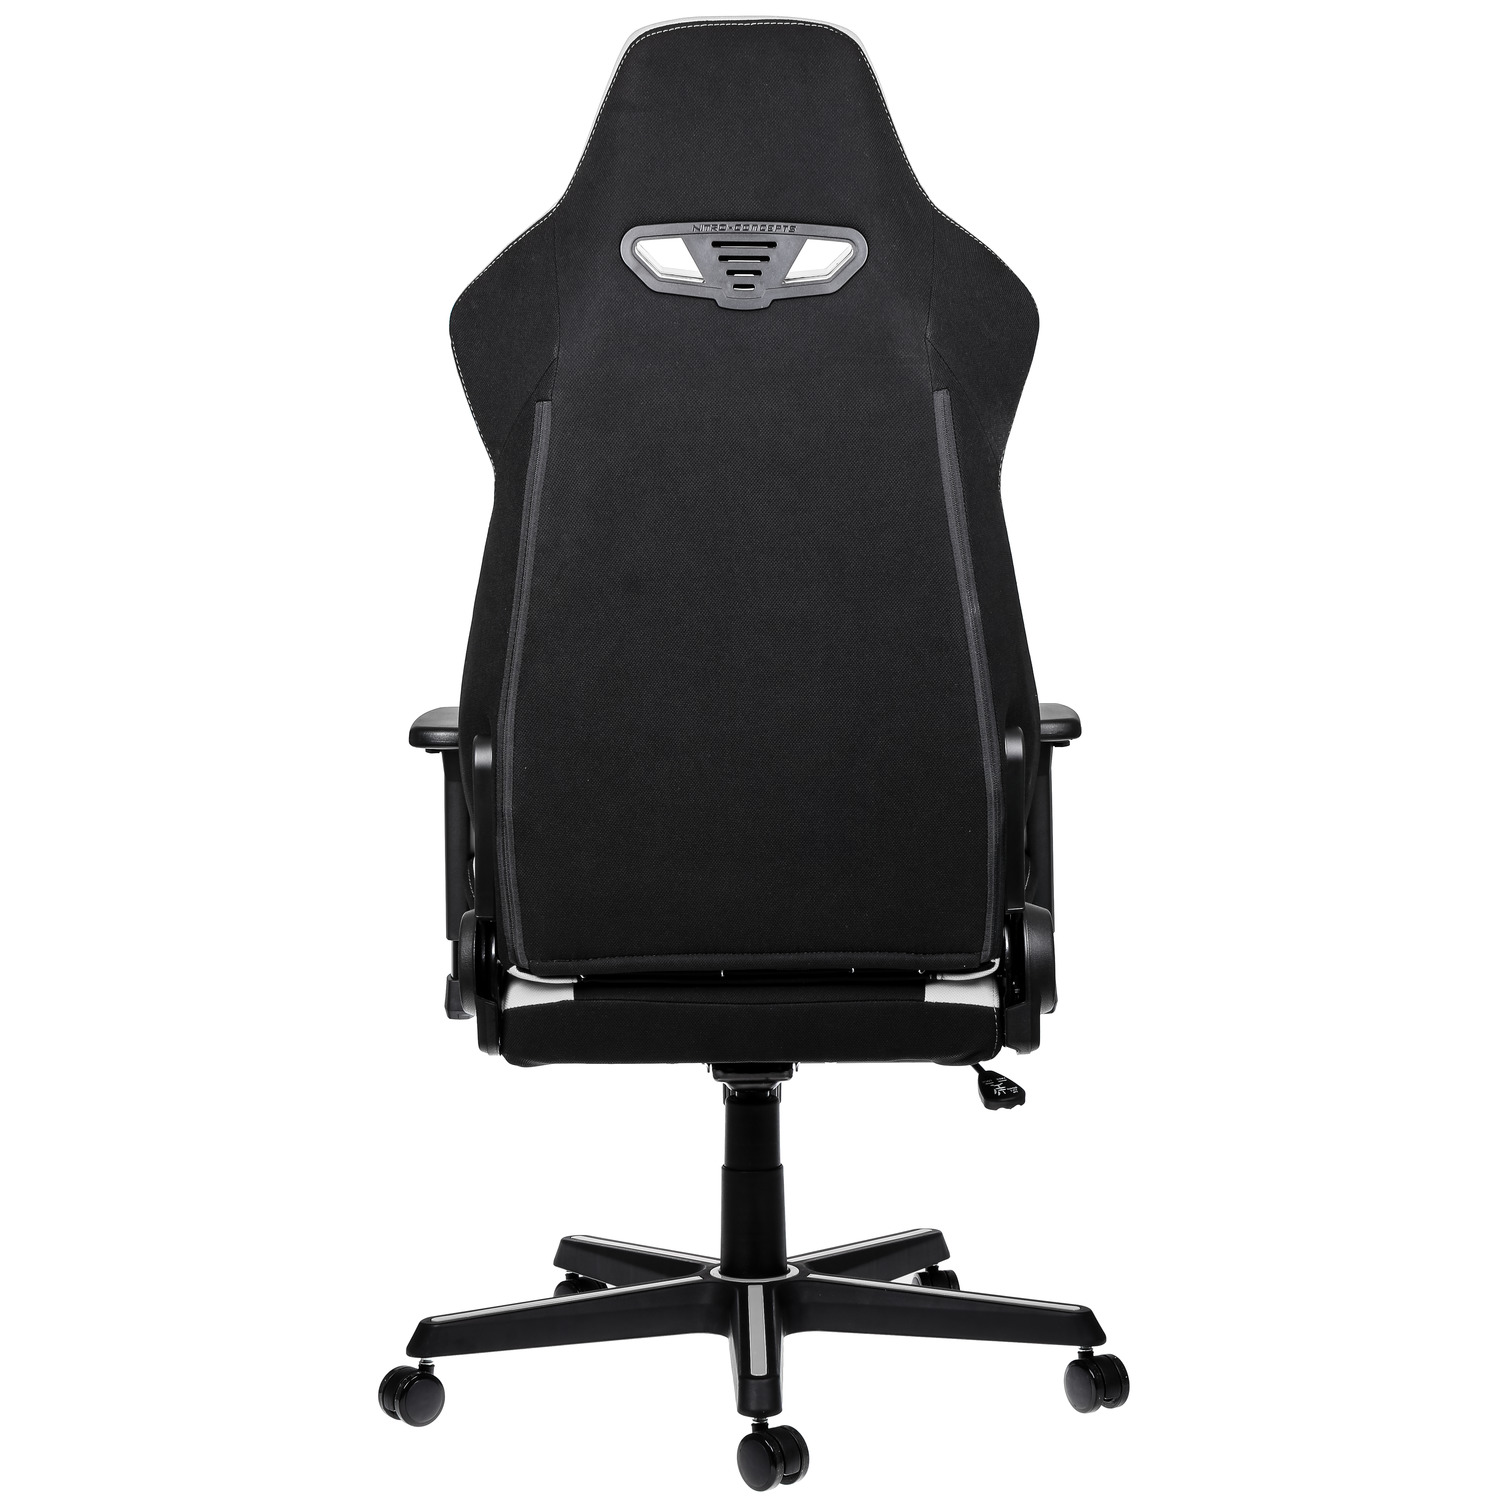 Nitro Concepts - S300 Gaming Chair Radiant White